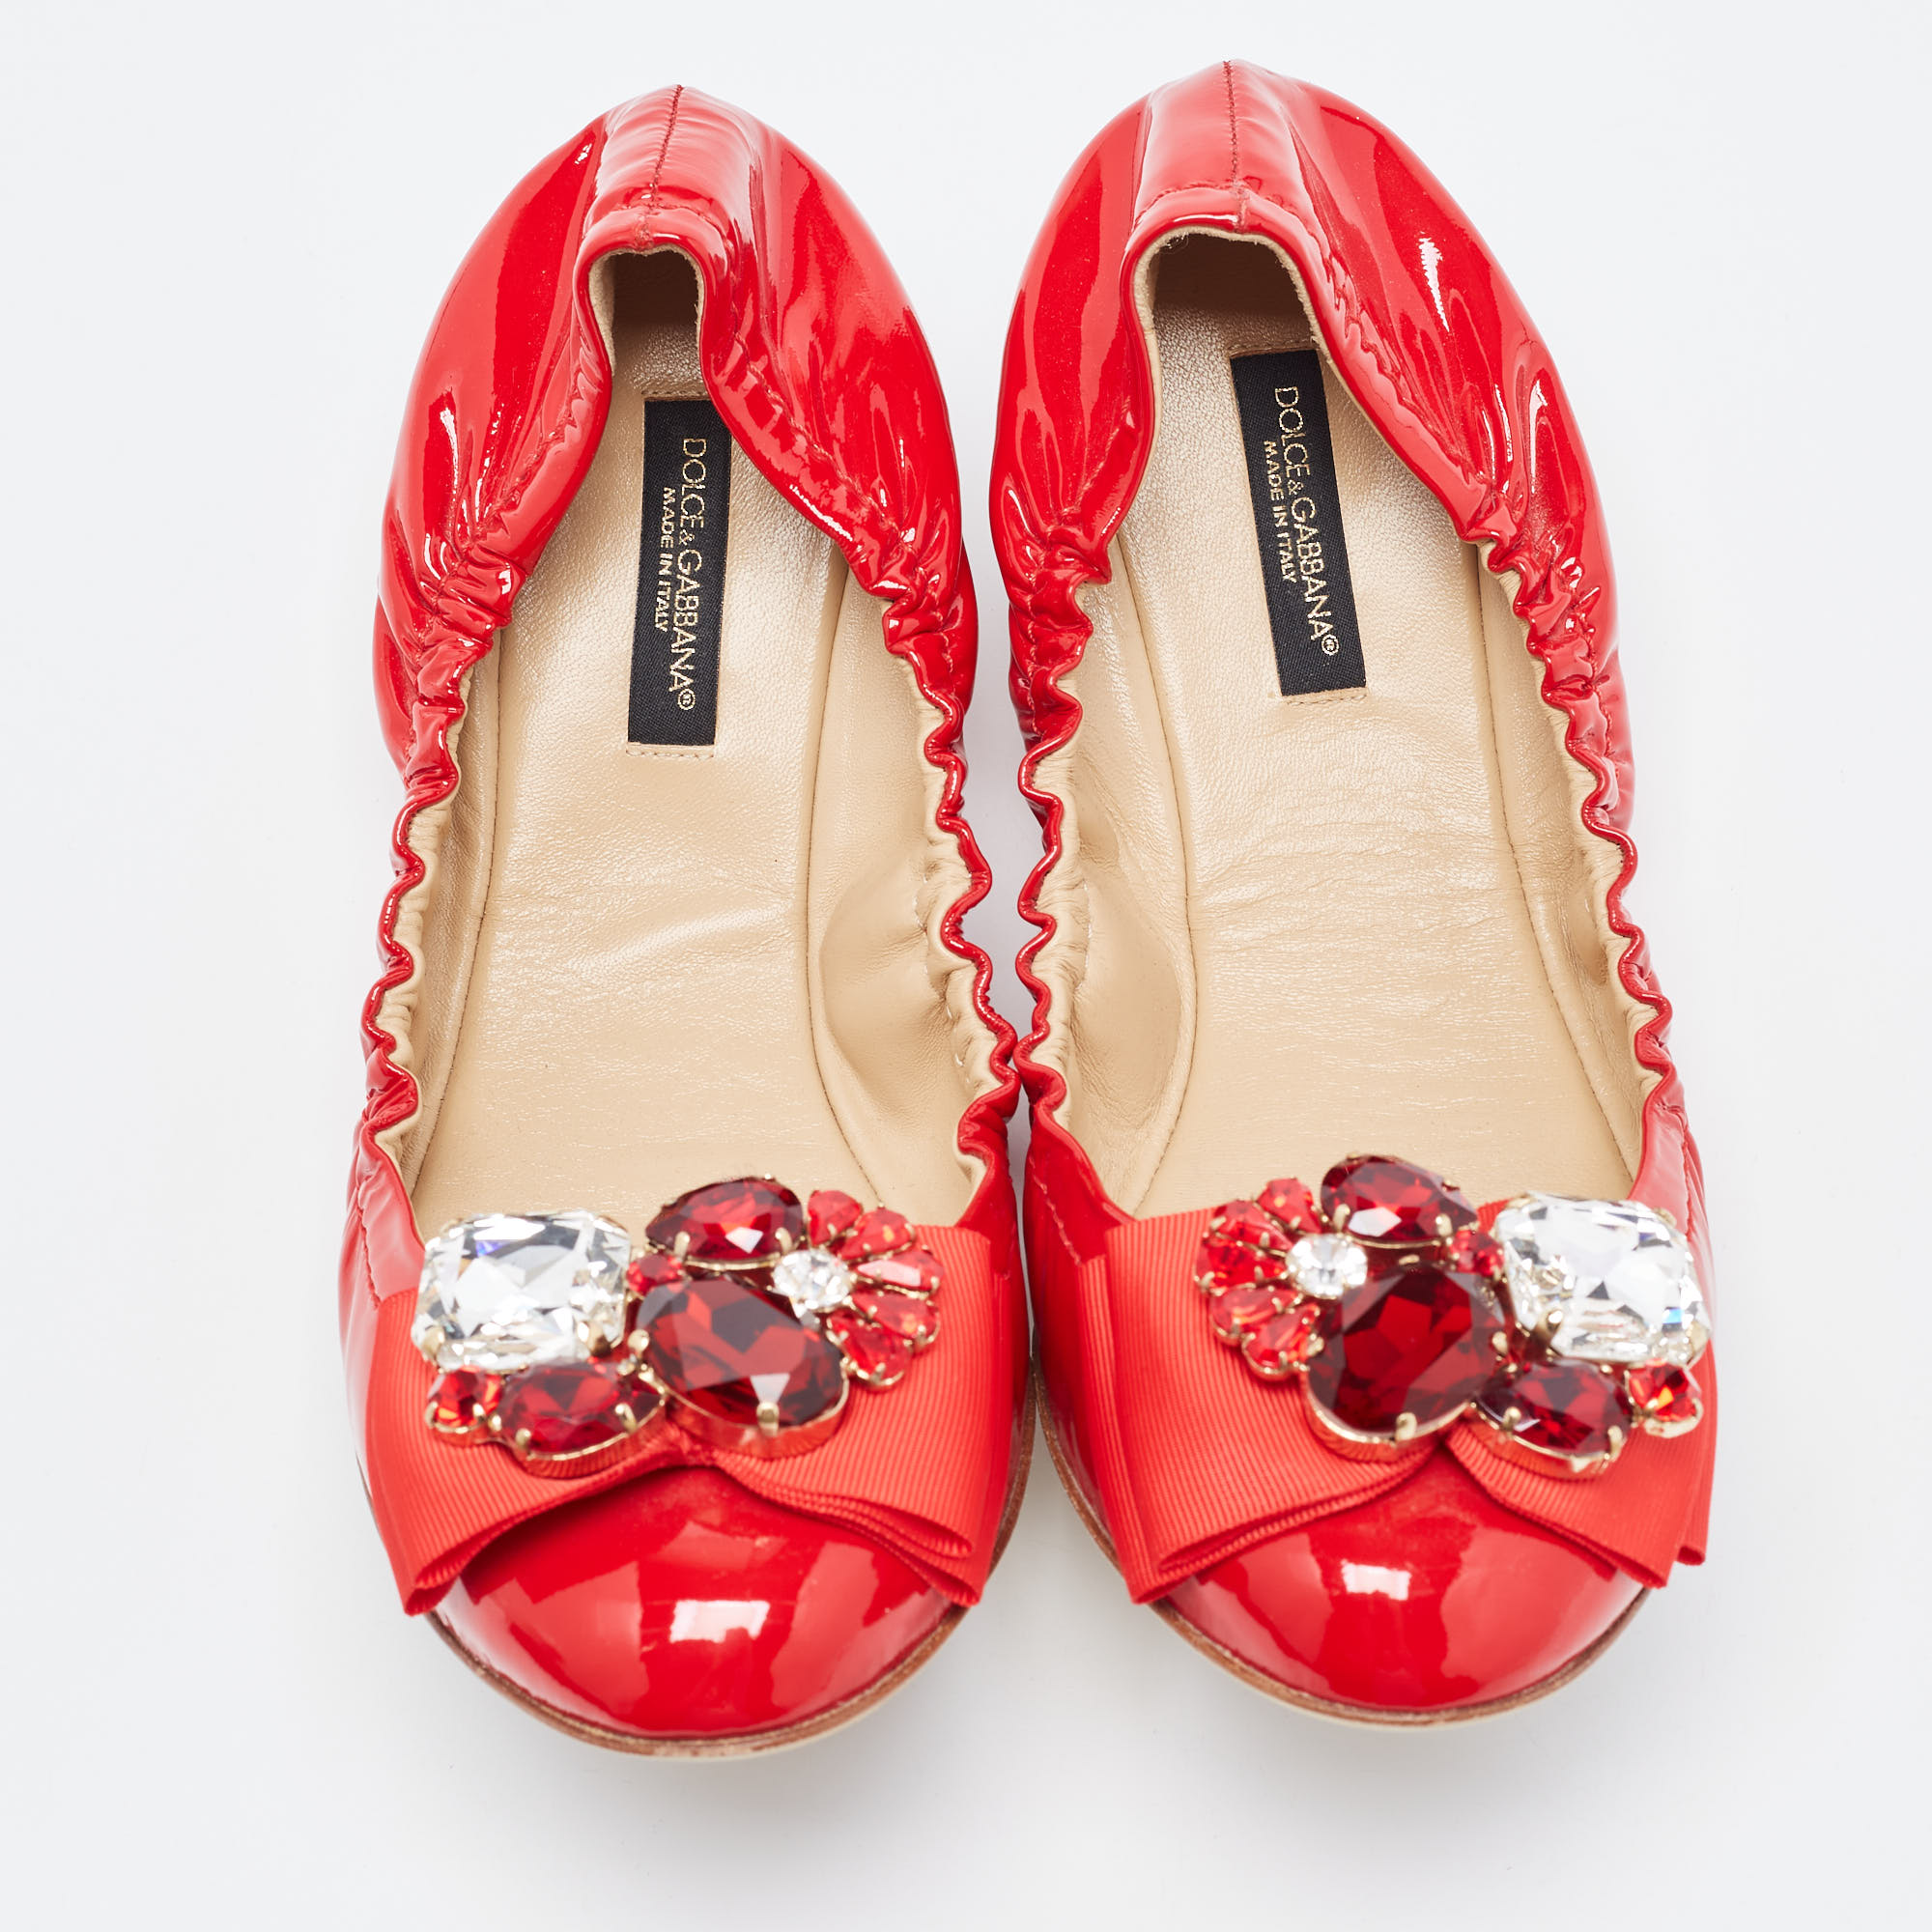 Dolce & Gabbana Red Patent Leather Crystal Embellished Bow Scrunch Ballet Flats Size 37